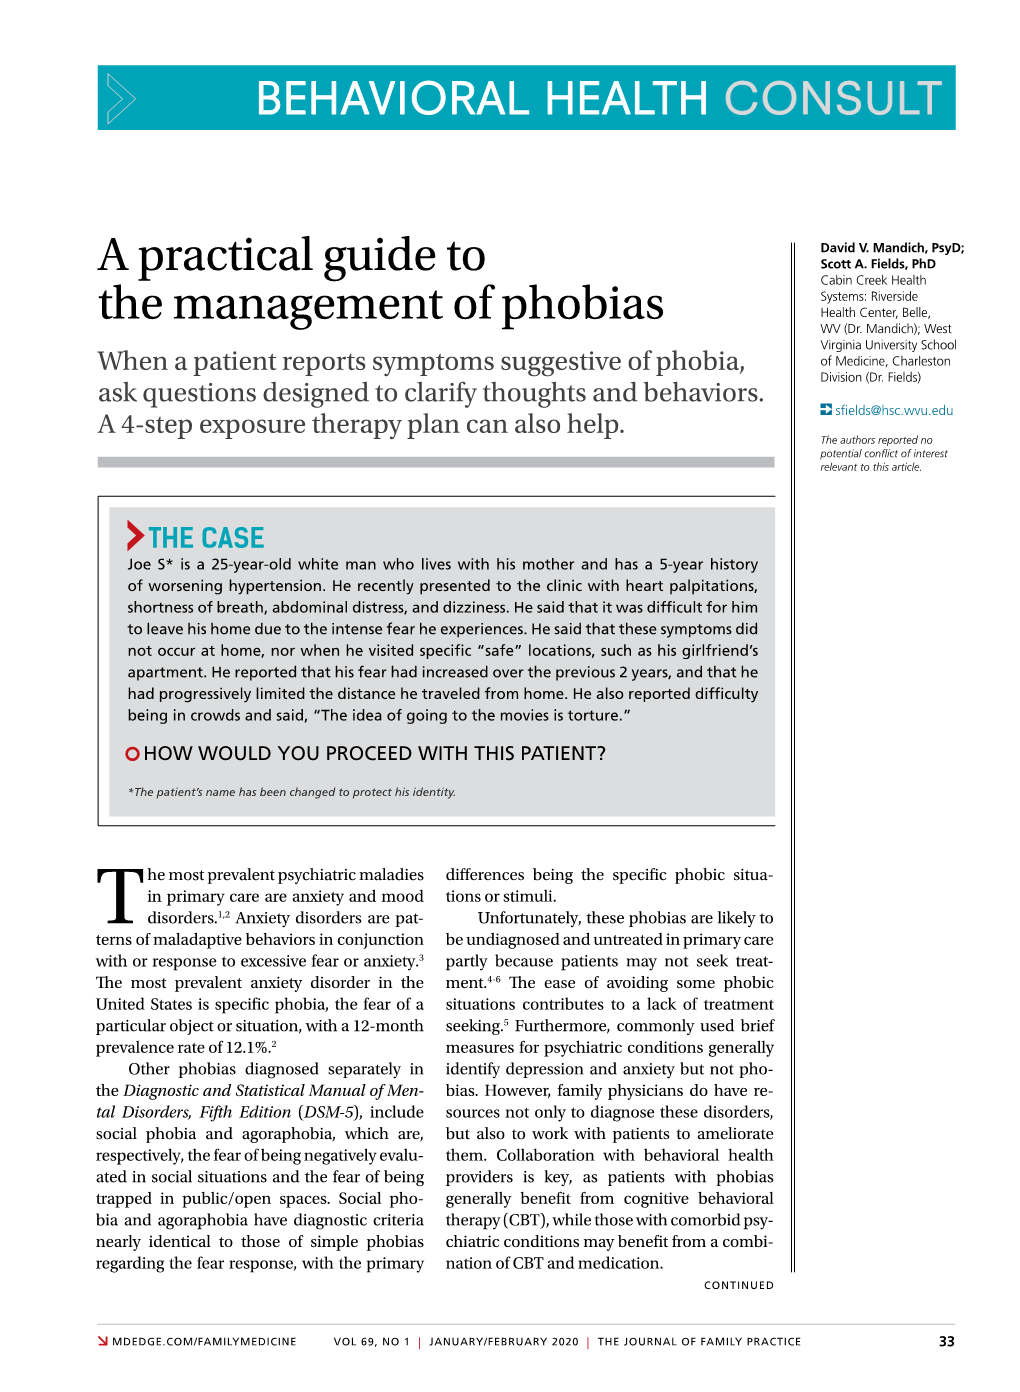 A Practical Guide to the Management of Phobias